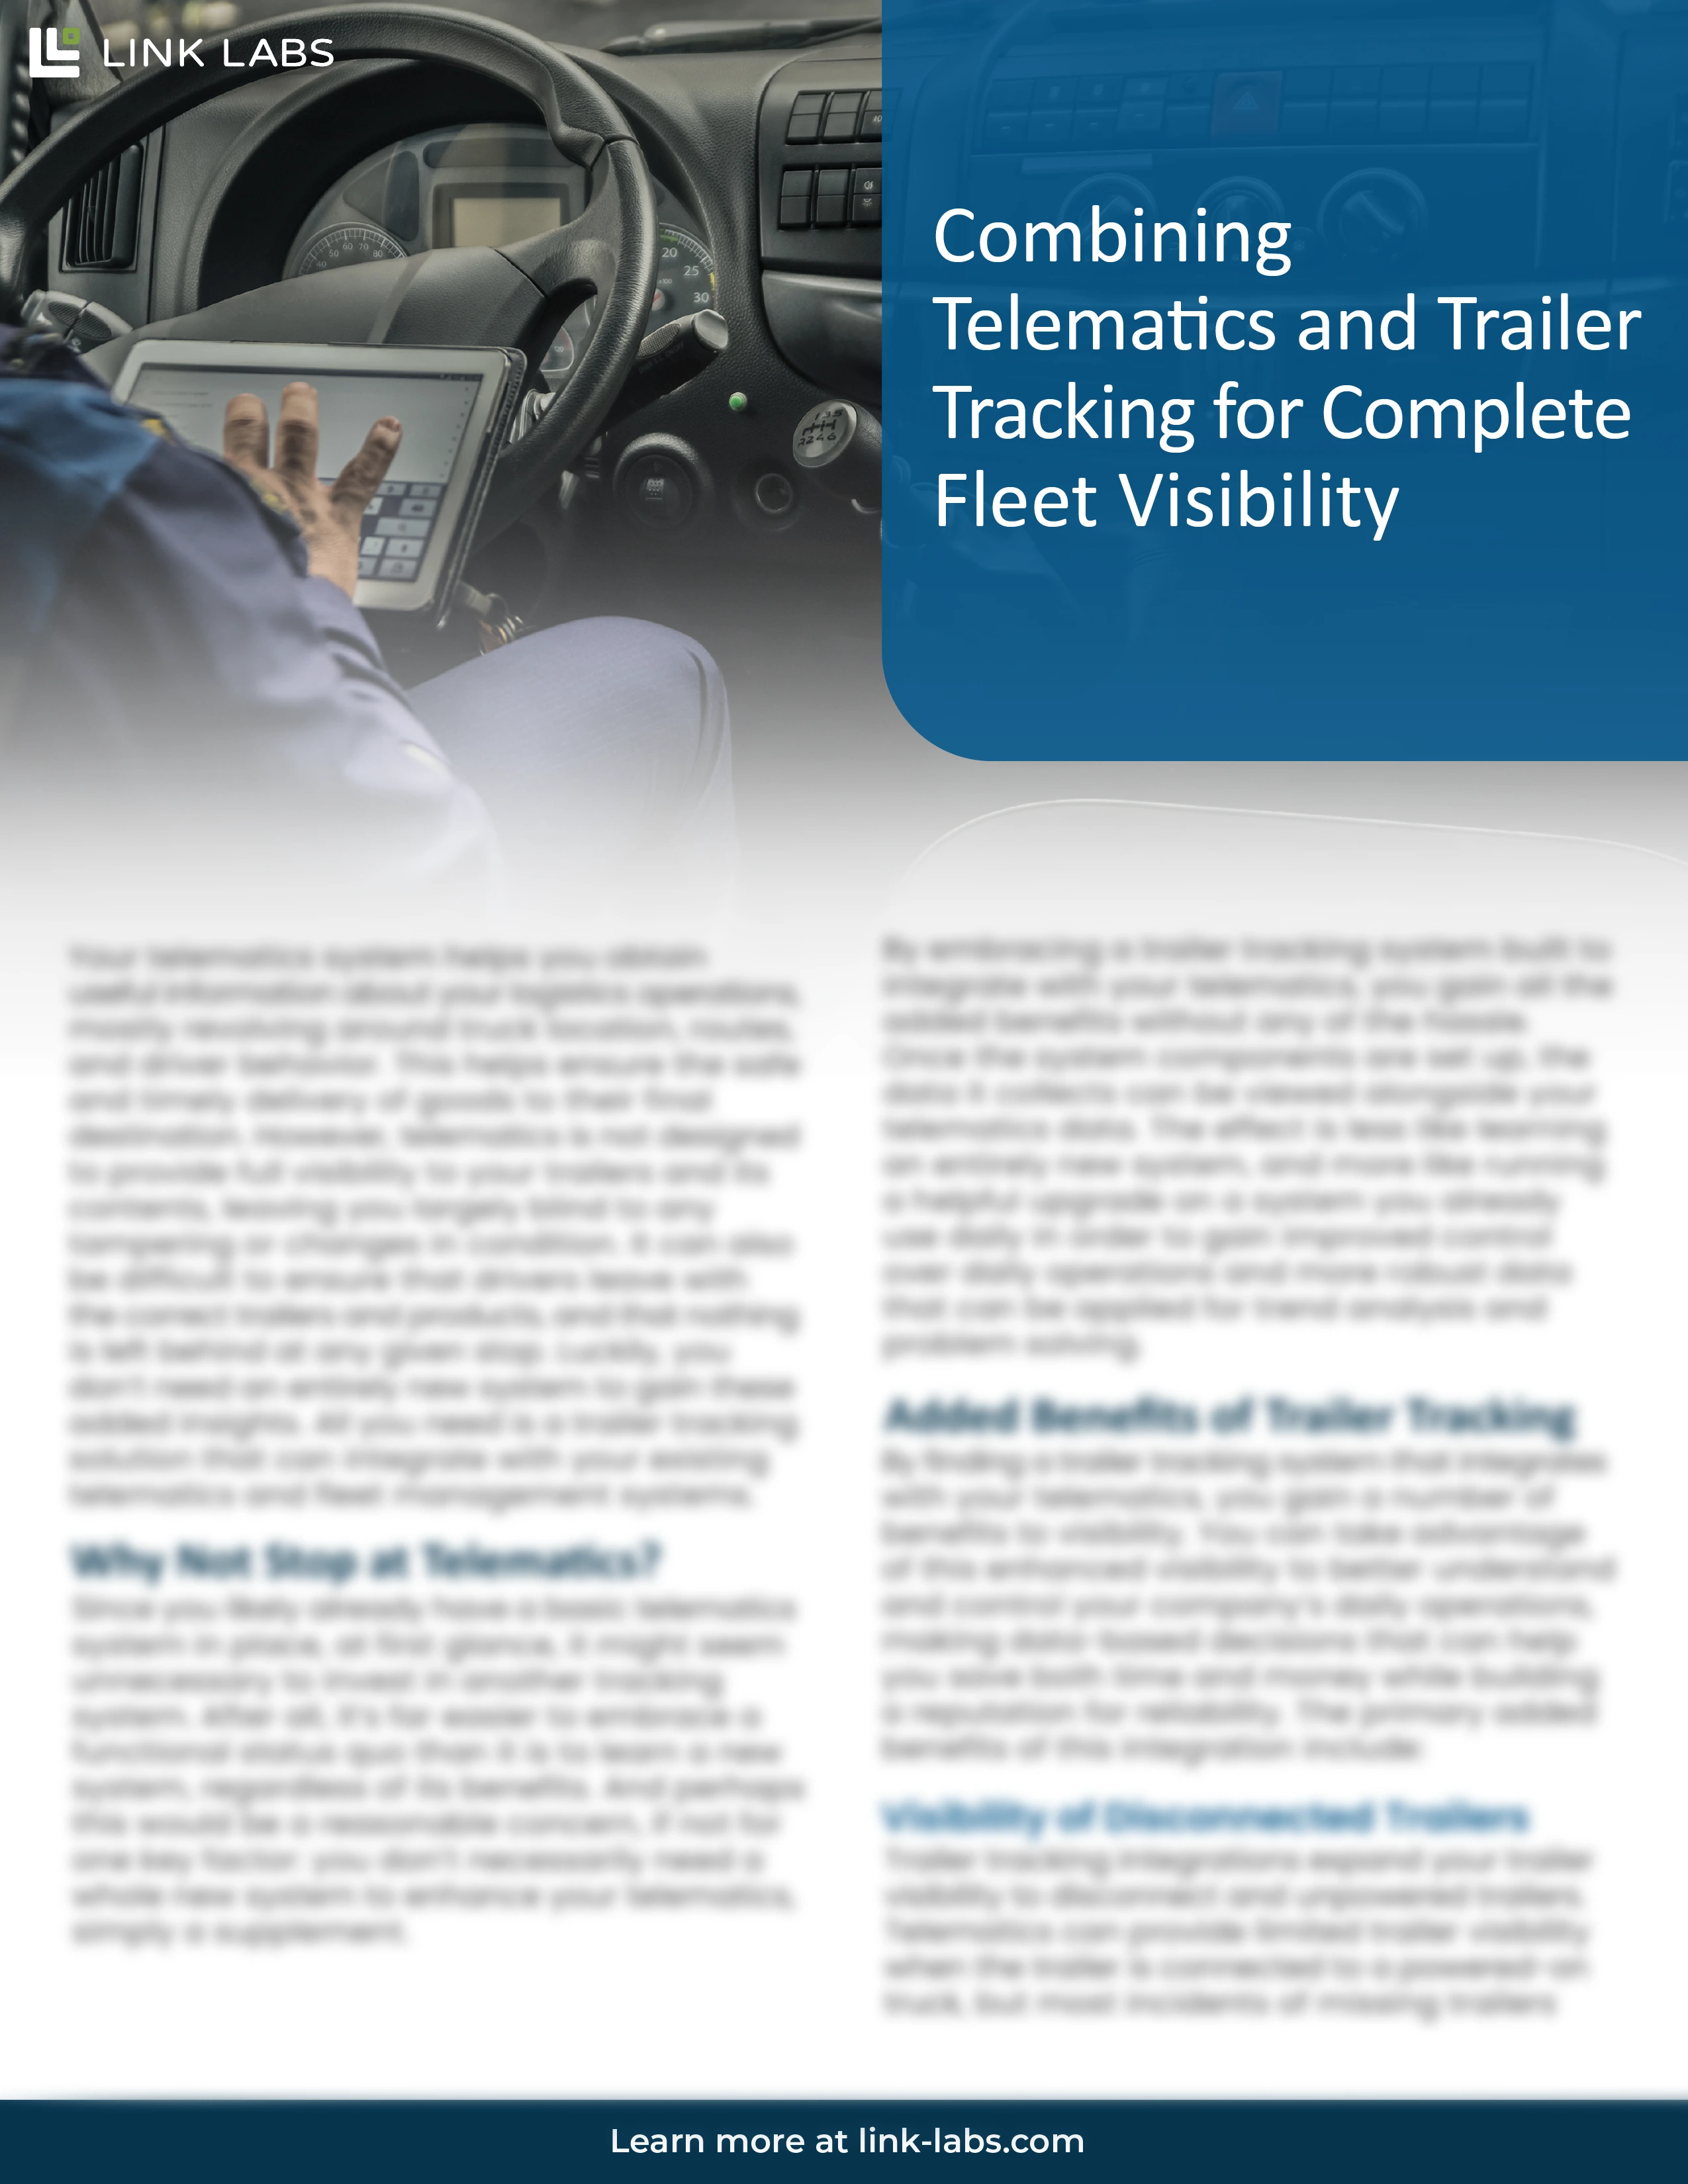 Combining Telematics and Trailer Tracking for Complete Fleet Visibility